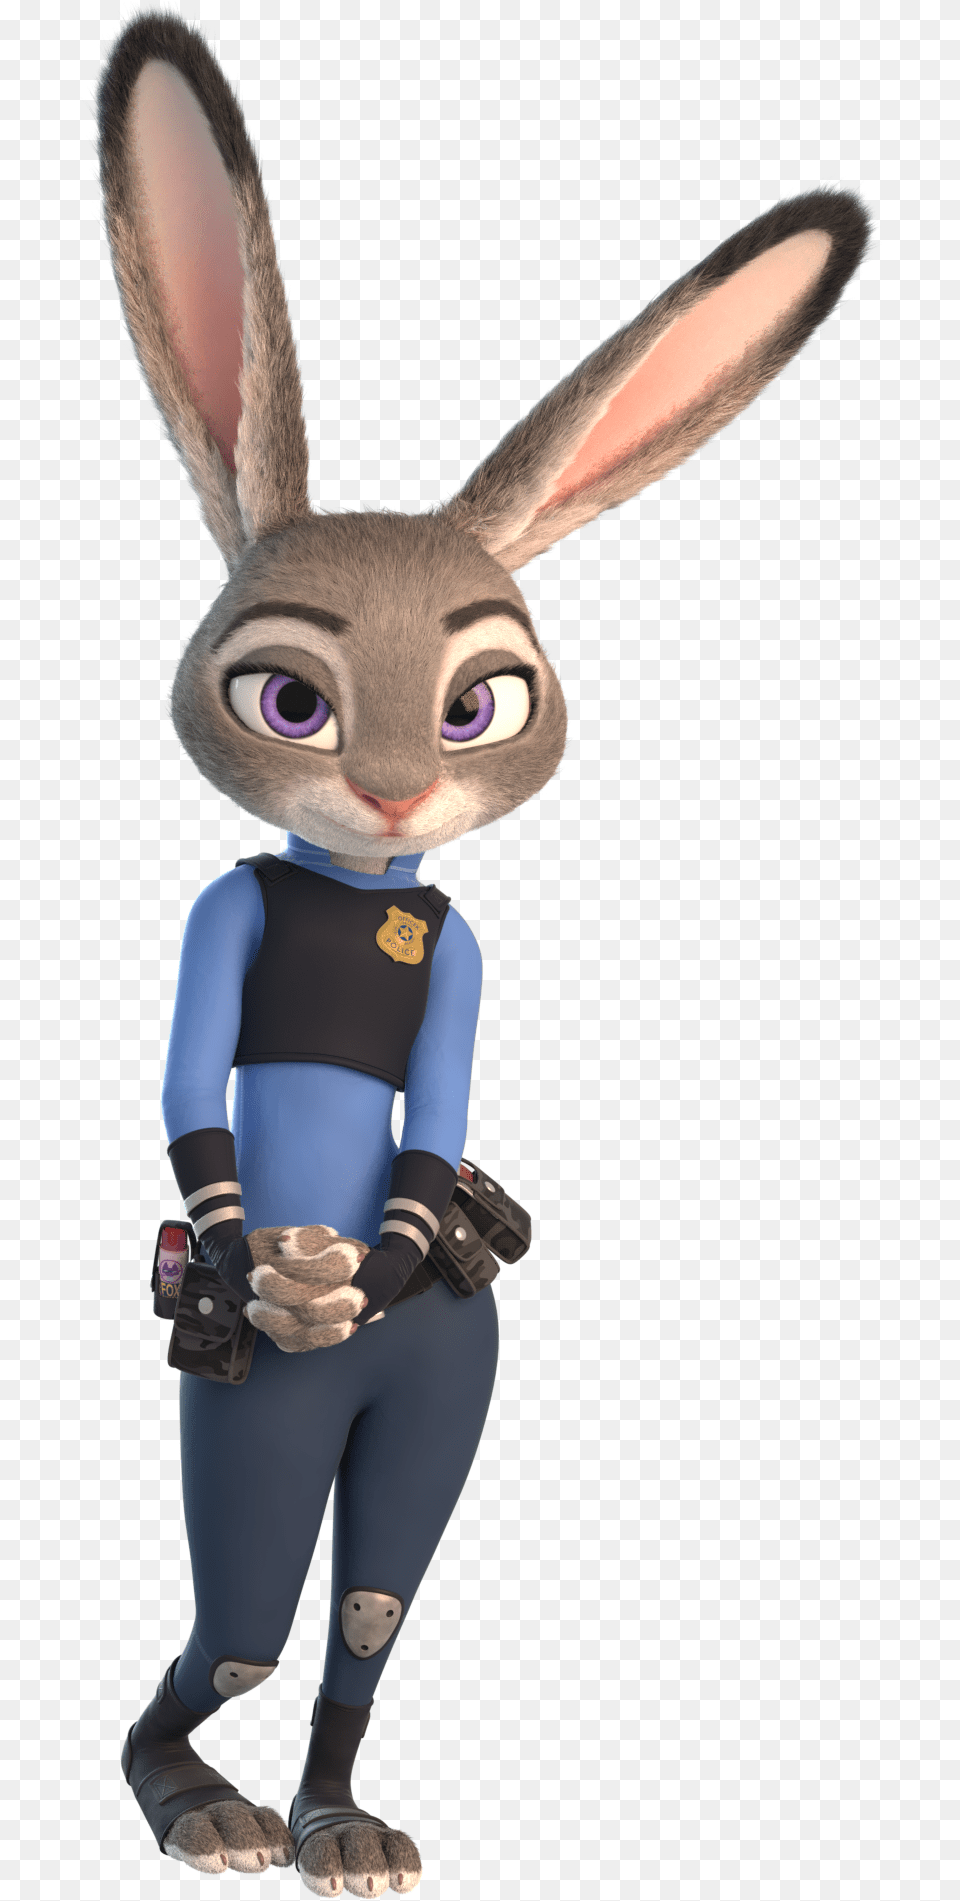 Bunny From Zootopia Zootopia Judy Hopps Thicc, Cartoon, Animal, Mammal, Person Png